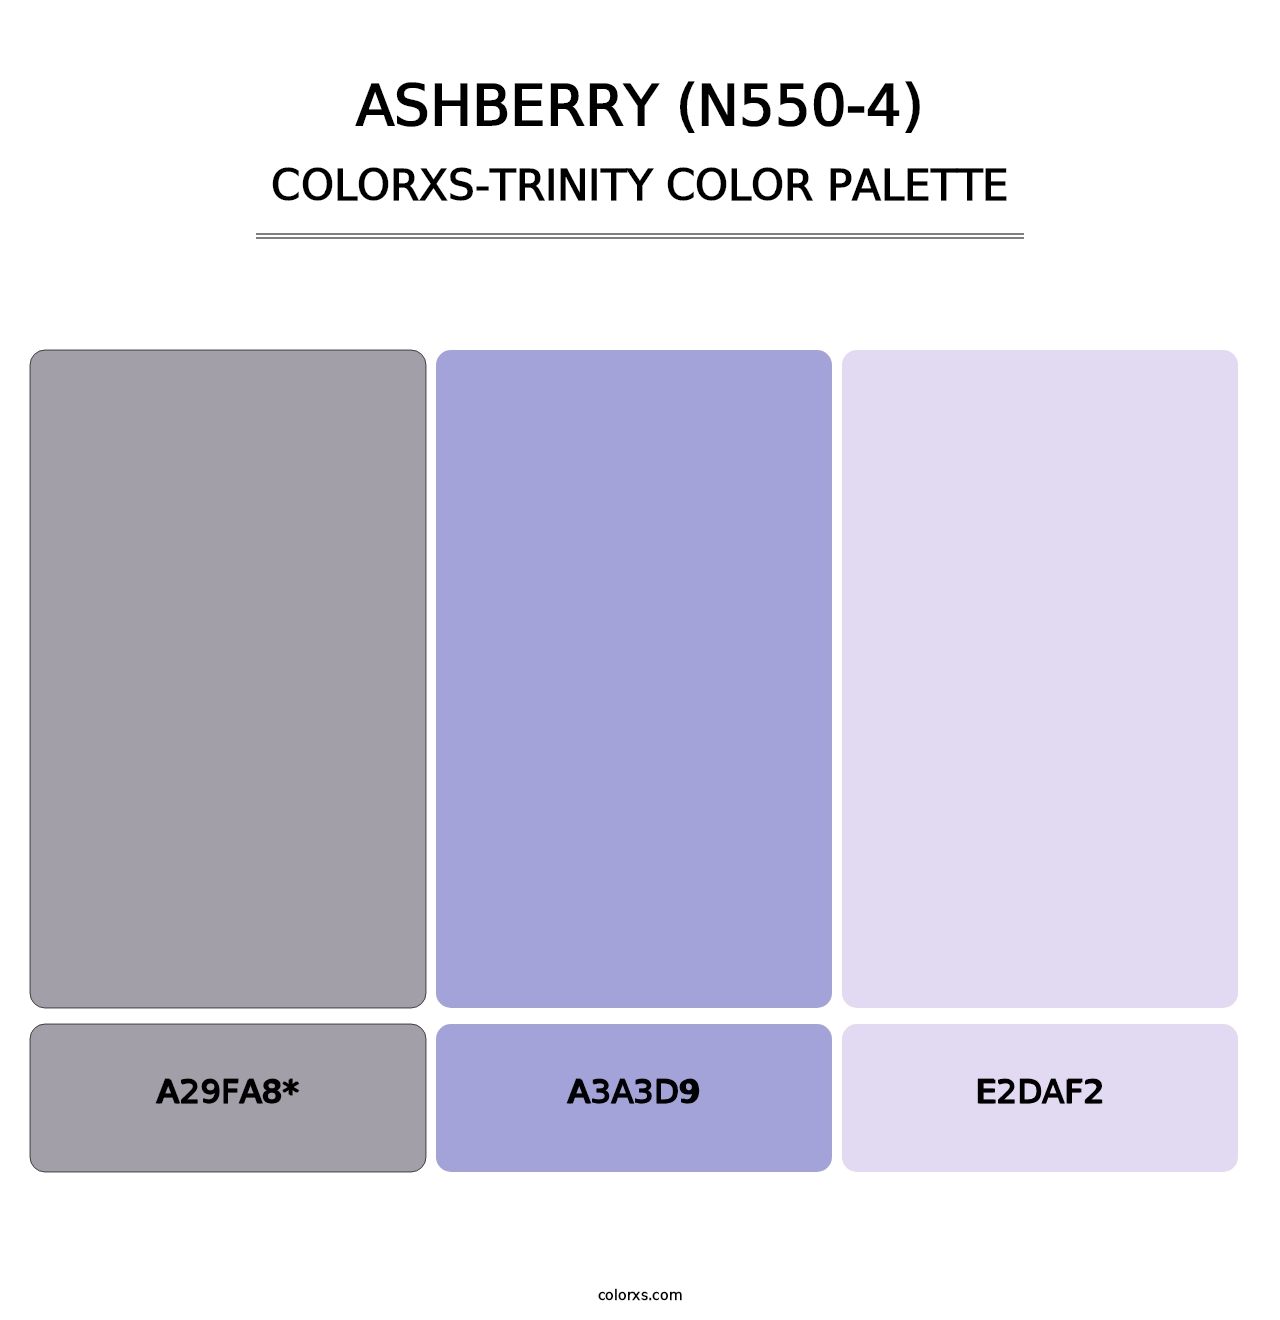 Ashberry (N550-4) - Colorxs Trinity Palette